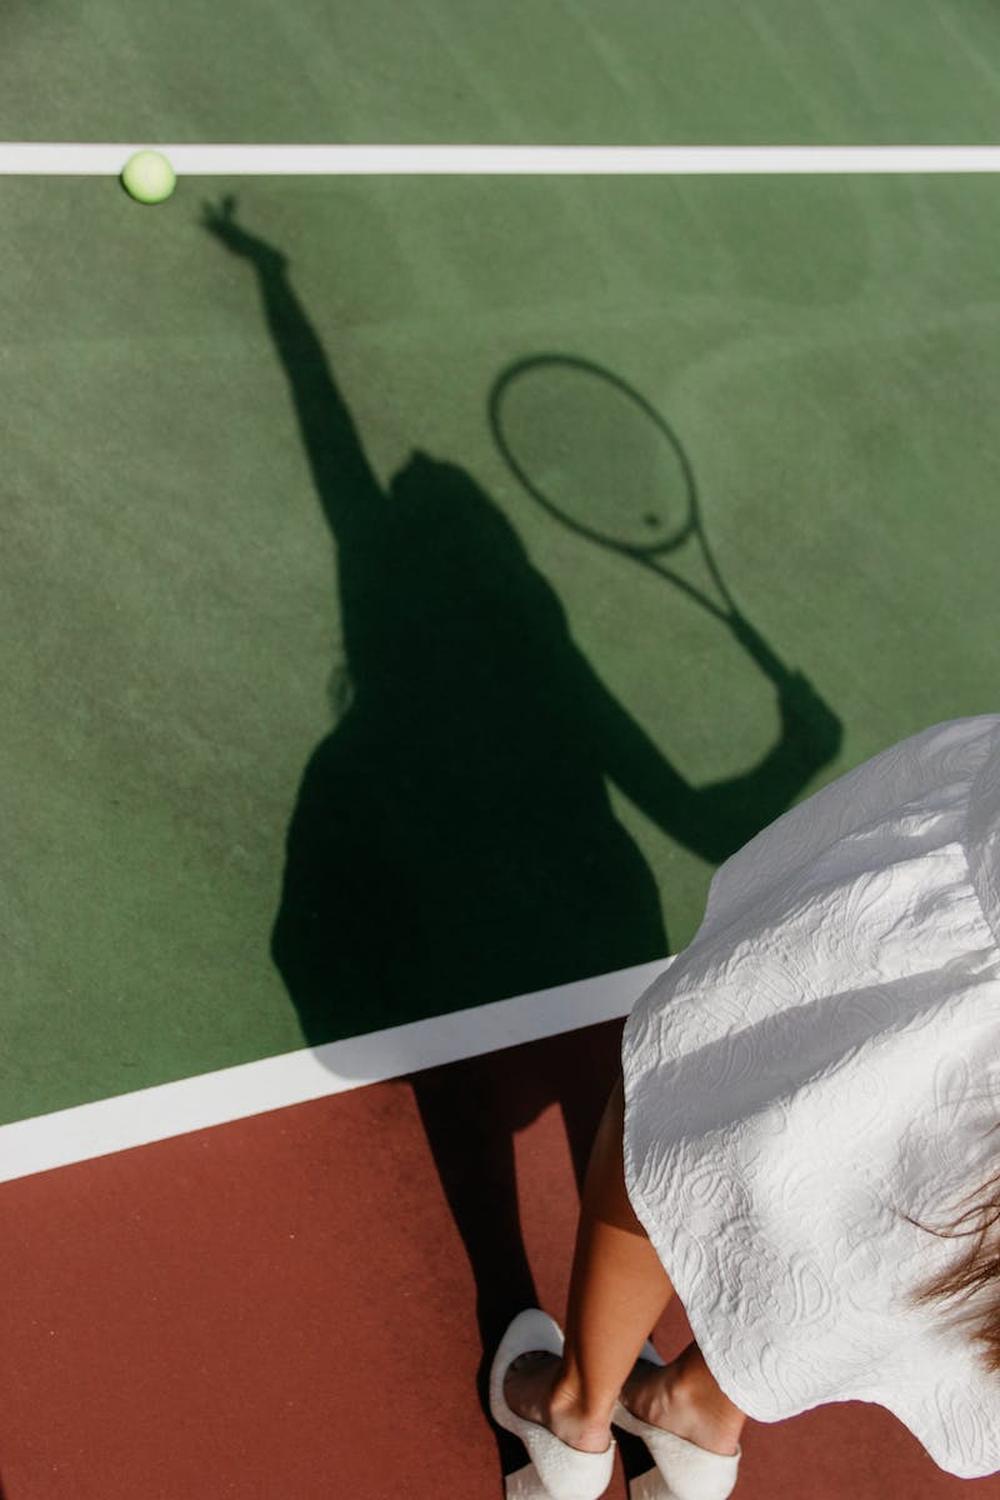 shadow_of_woman_playing_tennis